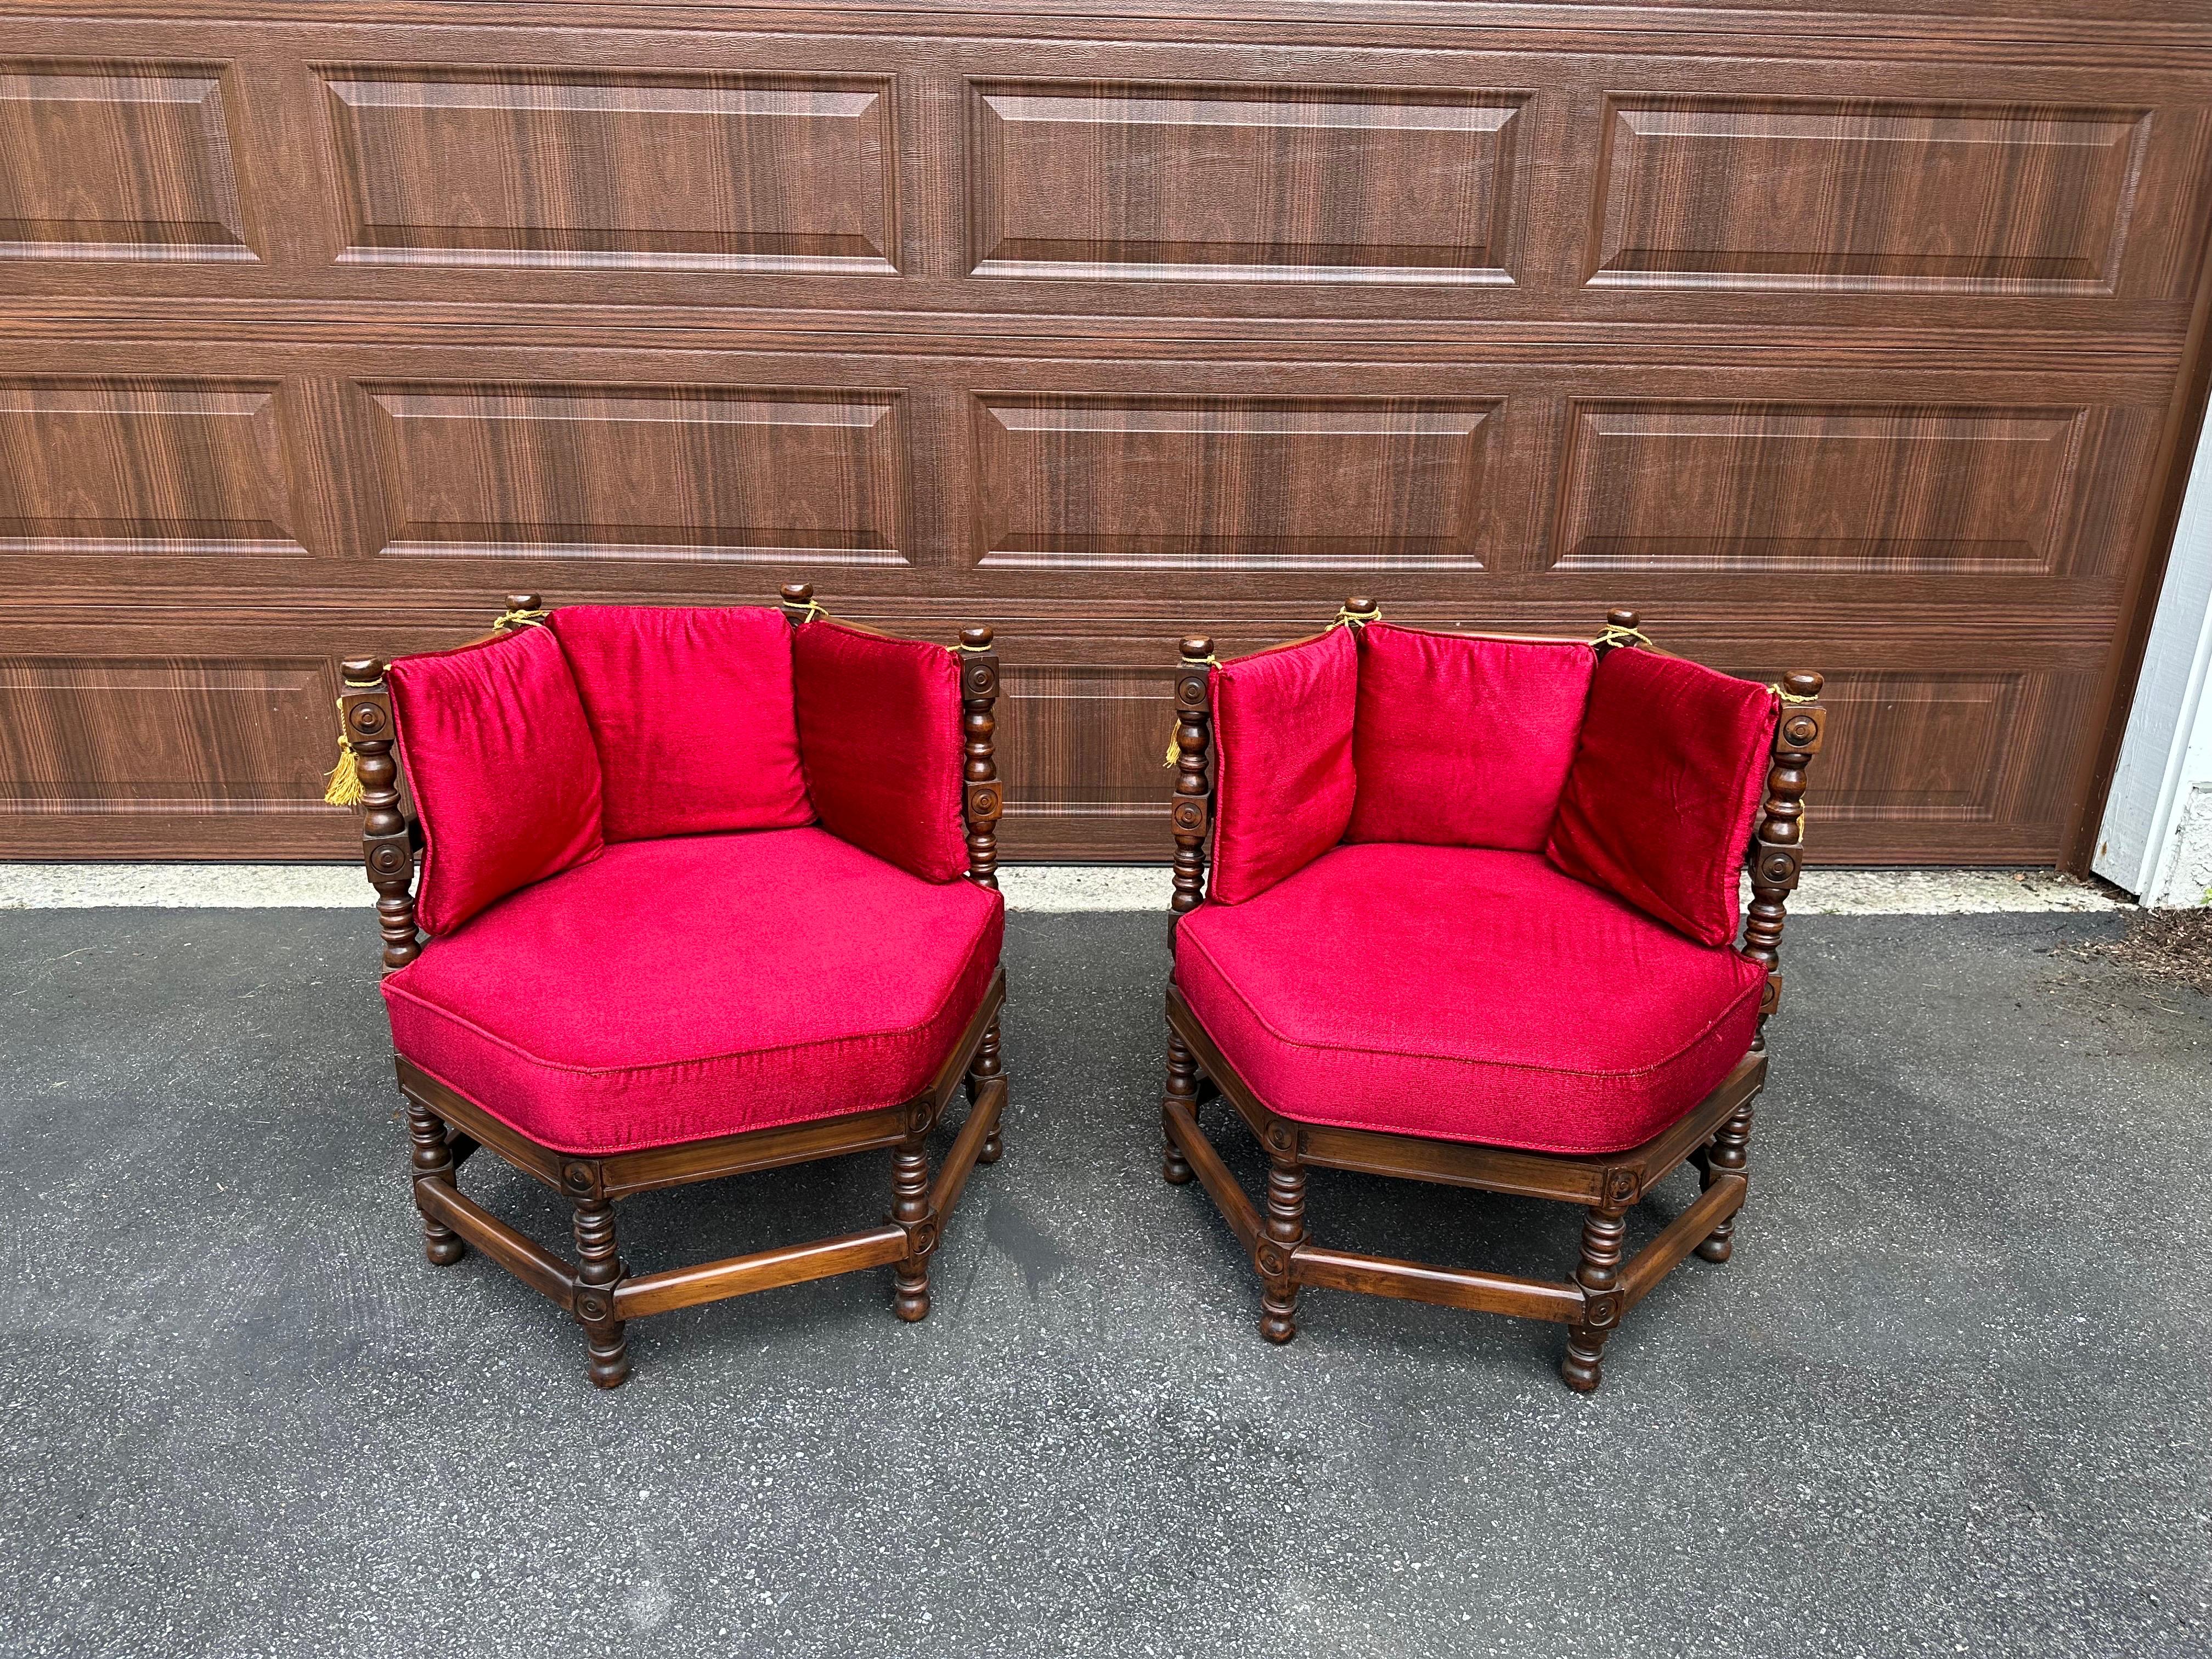 Fabulous pair of statement lounge chairs in red velvet and walnut. Believed to be from the ‘Showpiece’ collection from Lewitte Furniture. Lumber stamp puts these at 1964 at the latest. Mediterranean/Spanish Revival style, these chairs give great